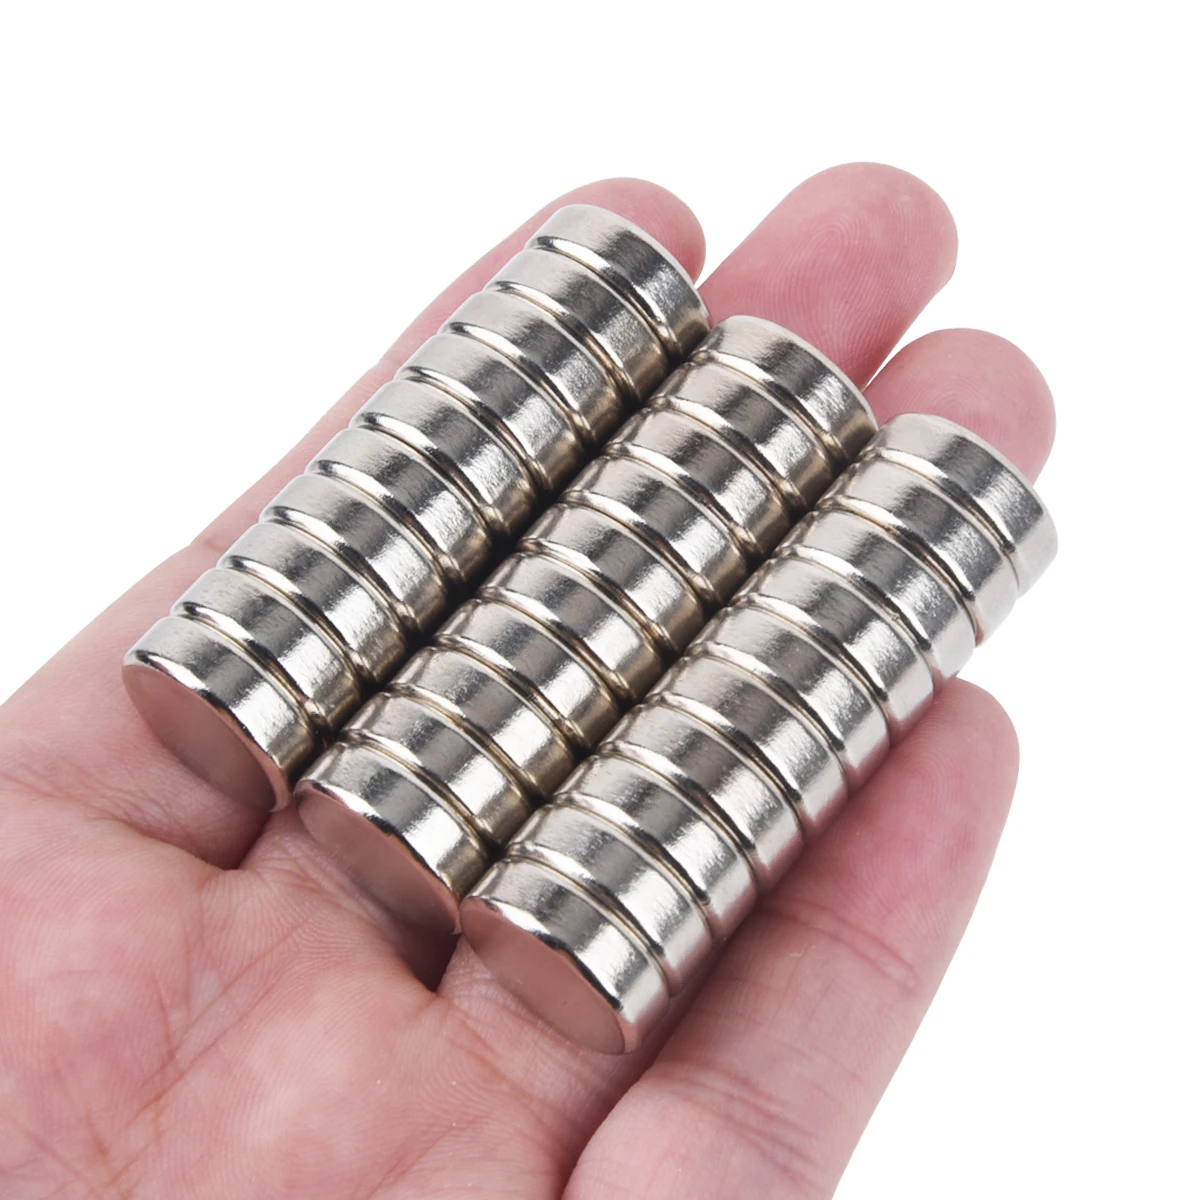 15x5mm Neodymium Magnet Rare Earth Permanent Magnet Material Strong Magnetic Round Magnets for Office Storage Whiteboard 3~30pcs